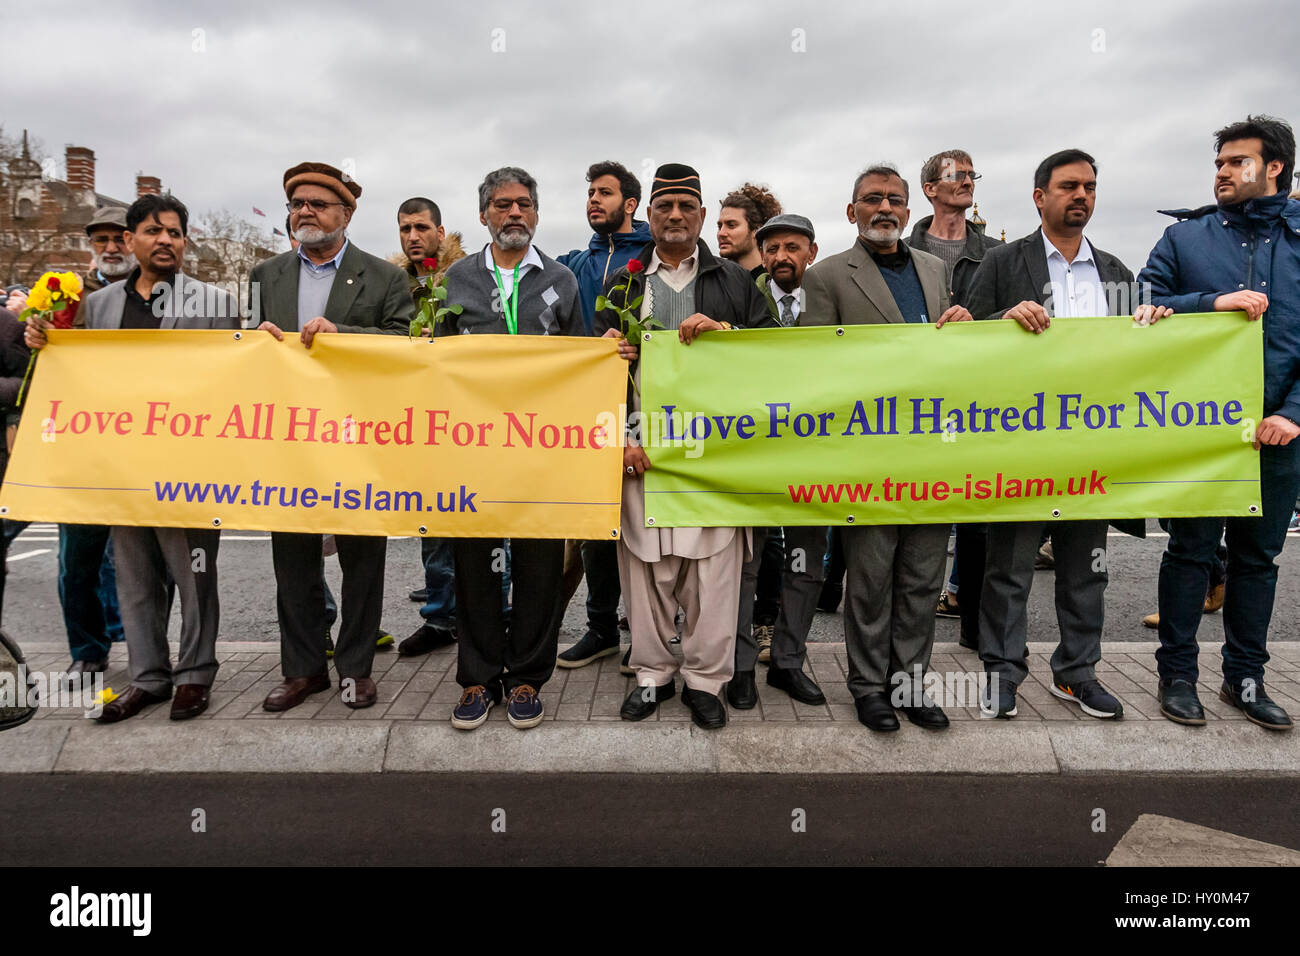 A Week On From The London Terror Attack, Members Of London's Muslim Community Hold Banners Denouncing The Attack, Westminster Bridge, London, UK Stock Photo